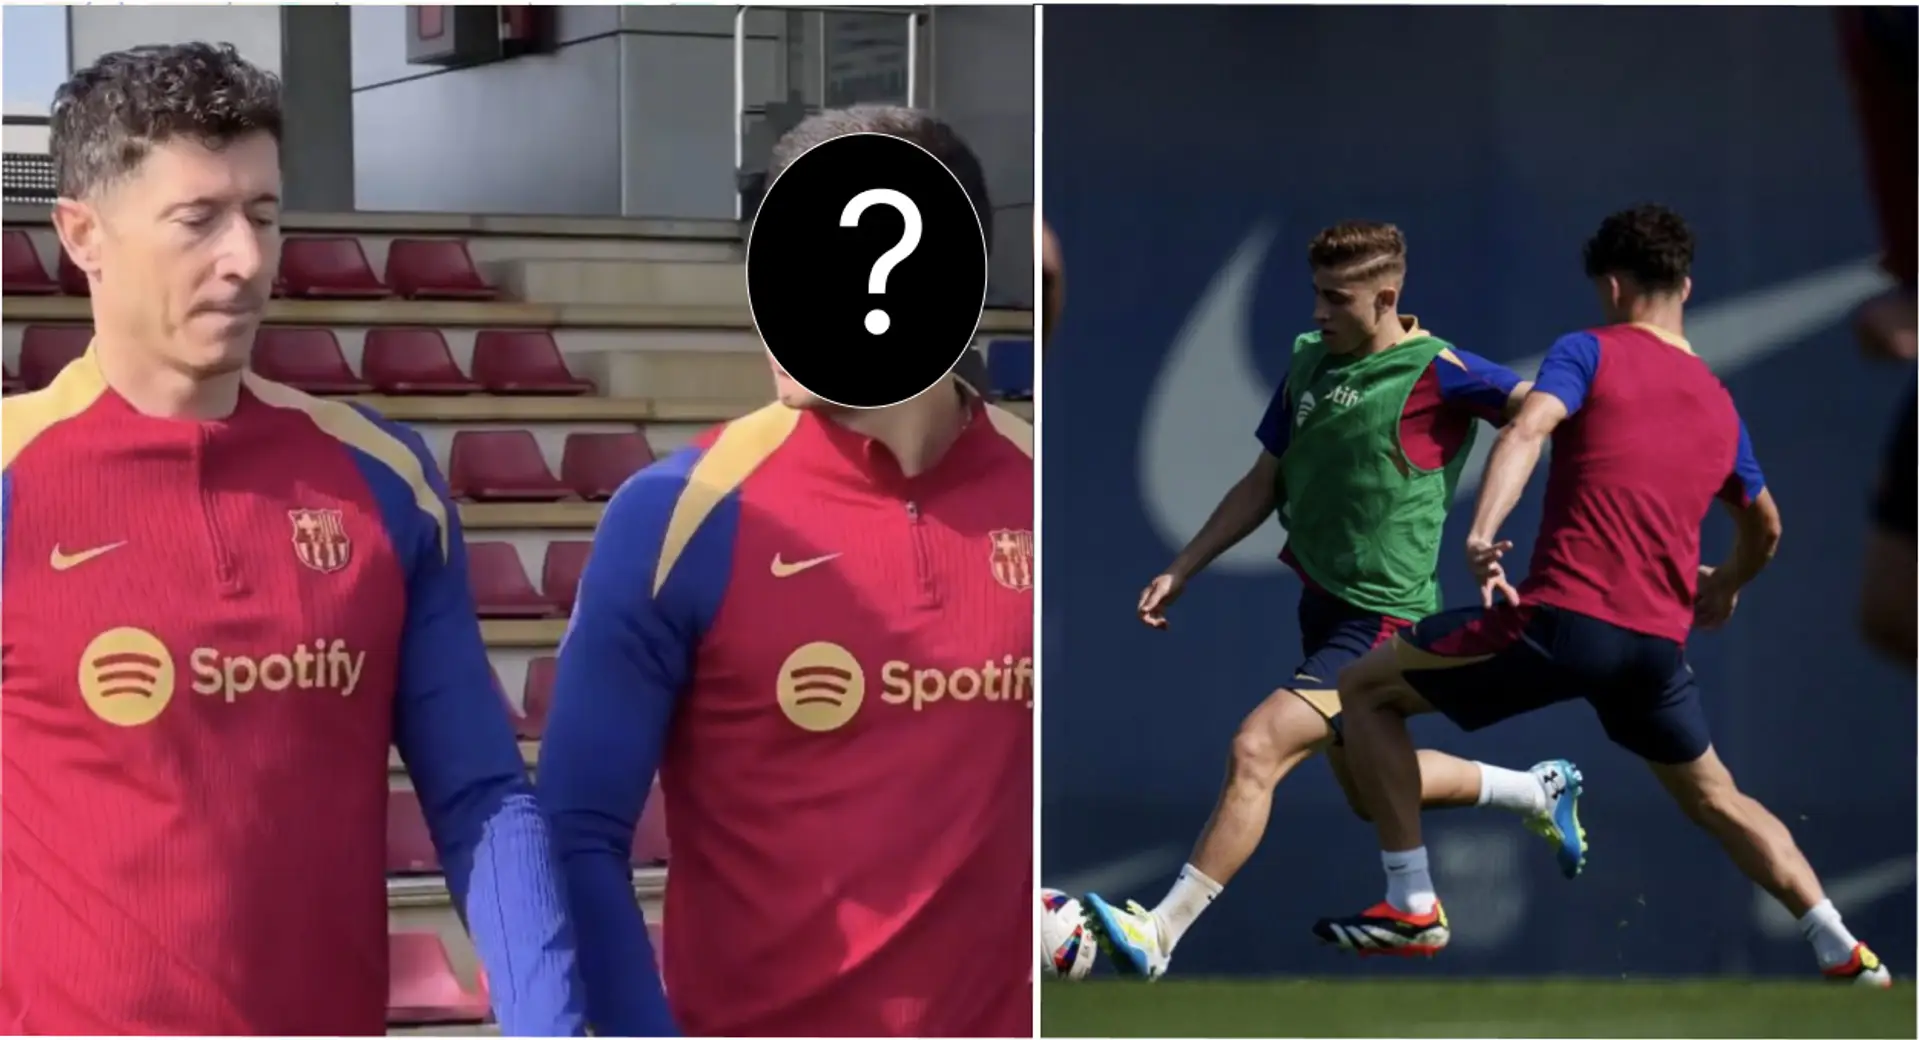 One player back from injury in time for Atleti clash as pics from latest training emerge